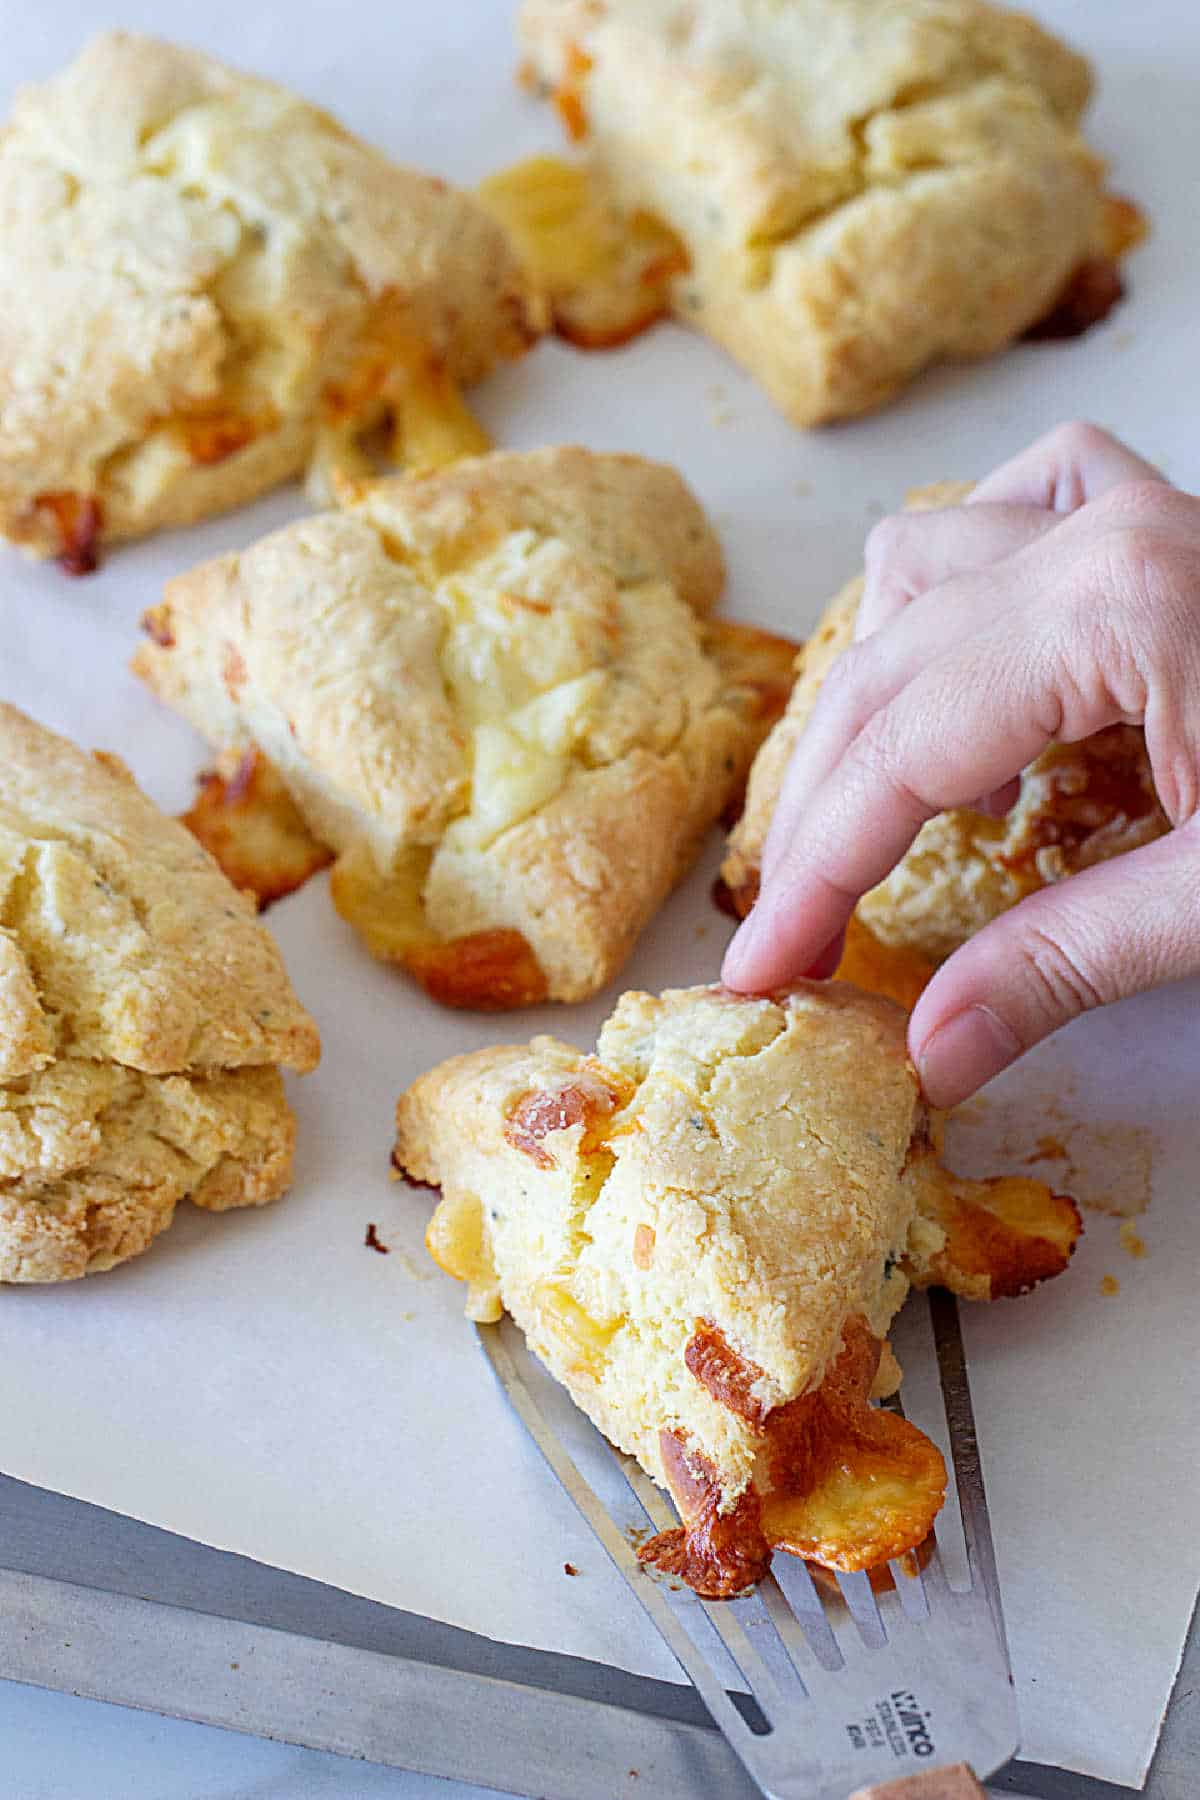 Lifting cheese scone from baking sheet containing several.